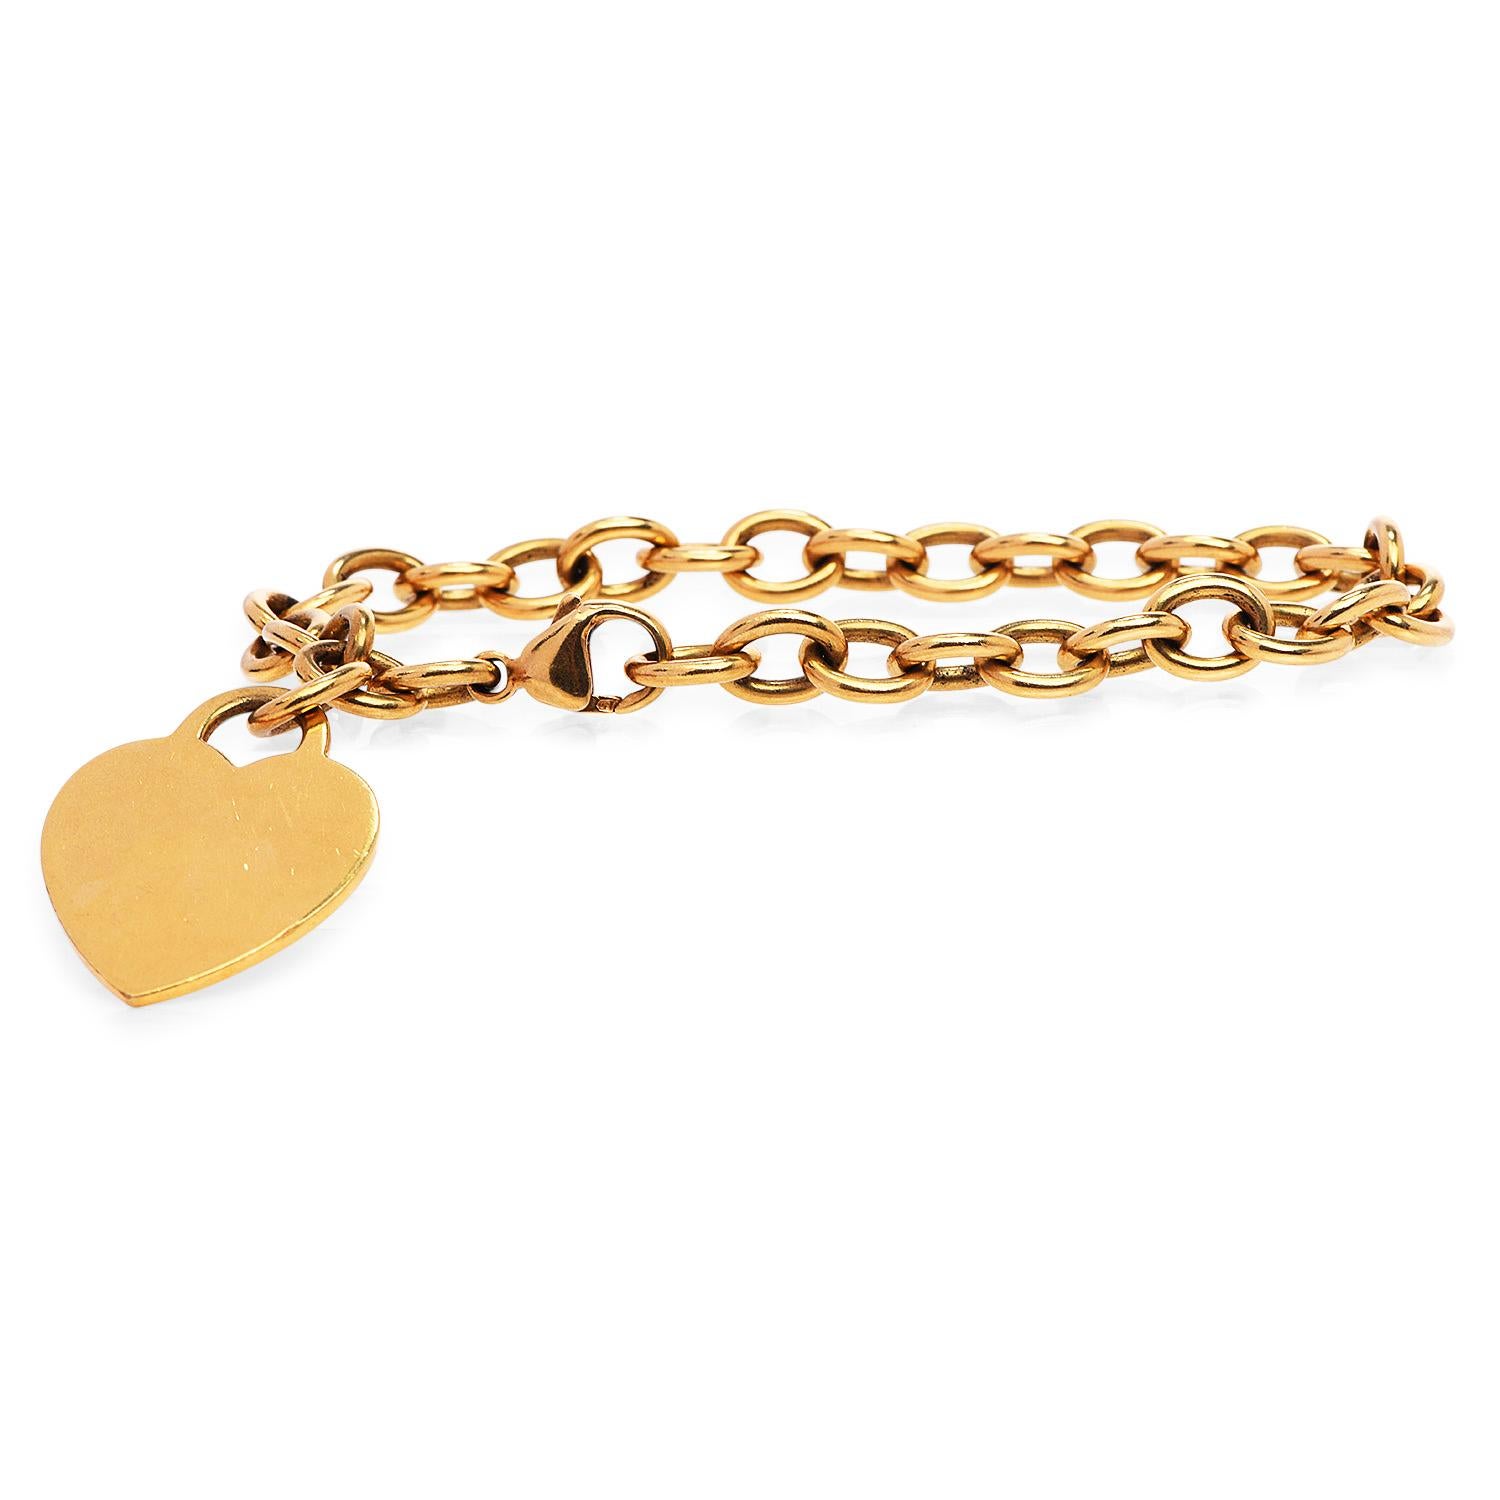 This Tiffany & Co. Dog Tag Link Bracelet is a multifunctional piece for a timeless look.

Crafted in solid 18K yellow gold, It has rolo style highly y polished links. accented by a Heart shape charm, stamped